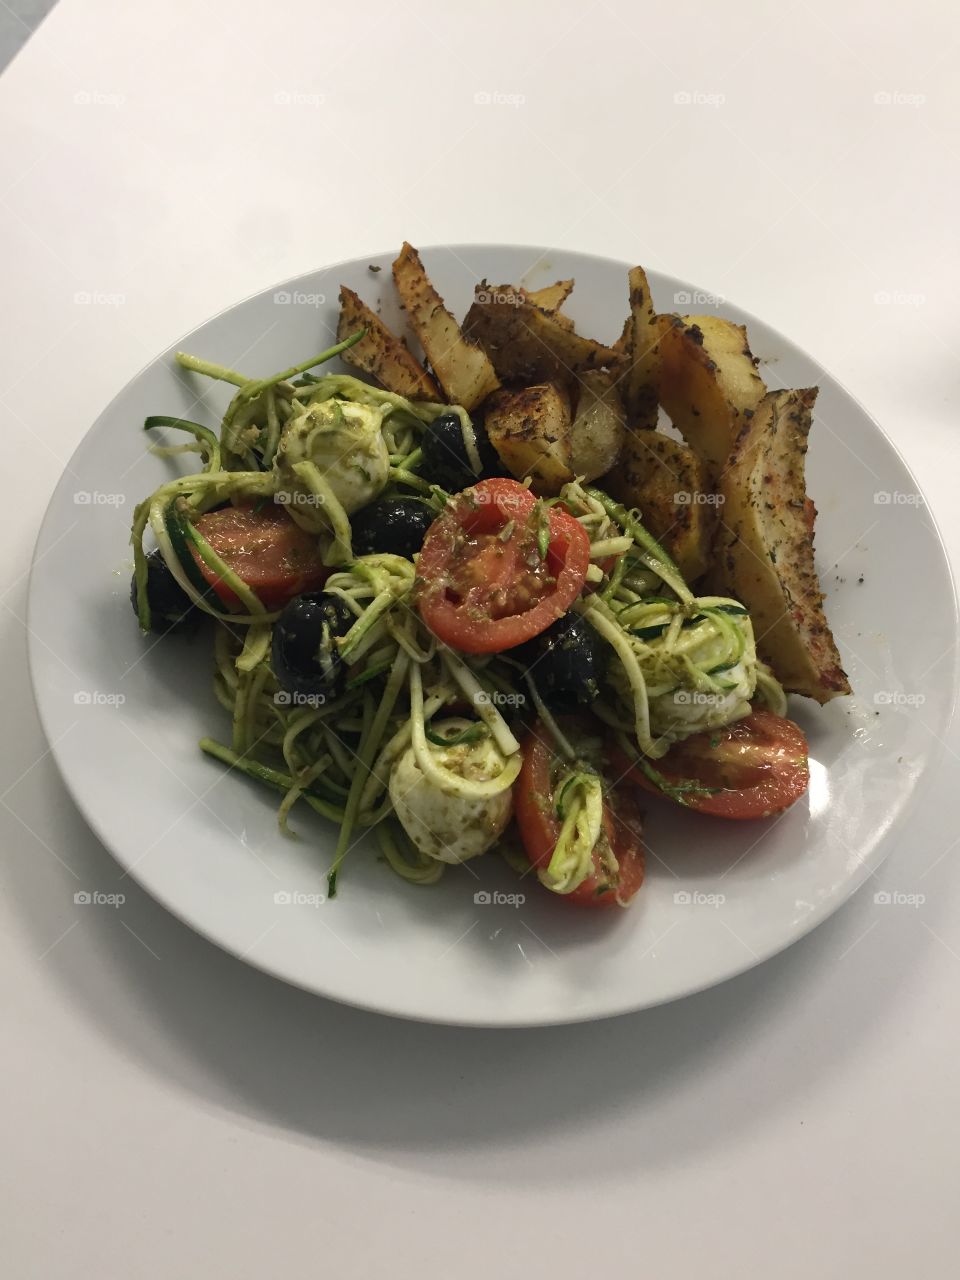 Zucchini salad and baked potatoes 